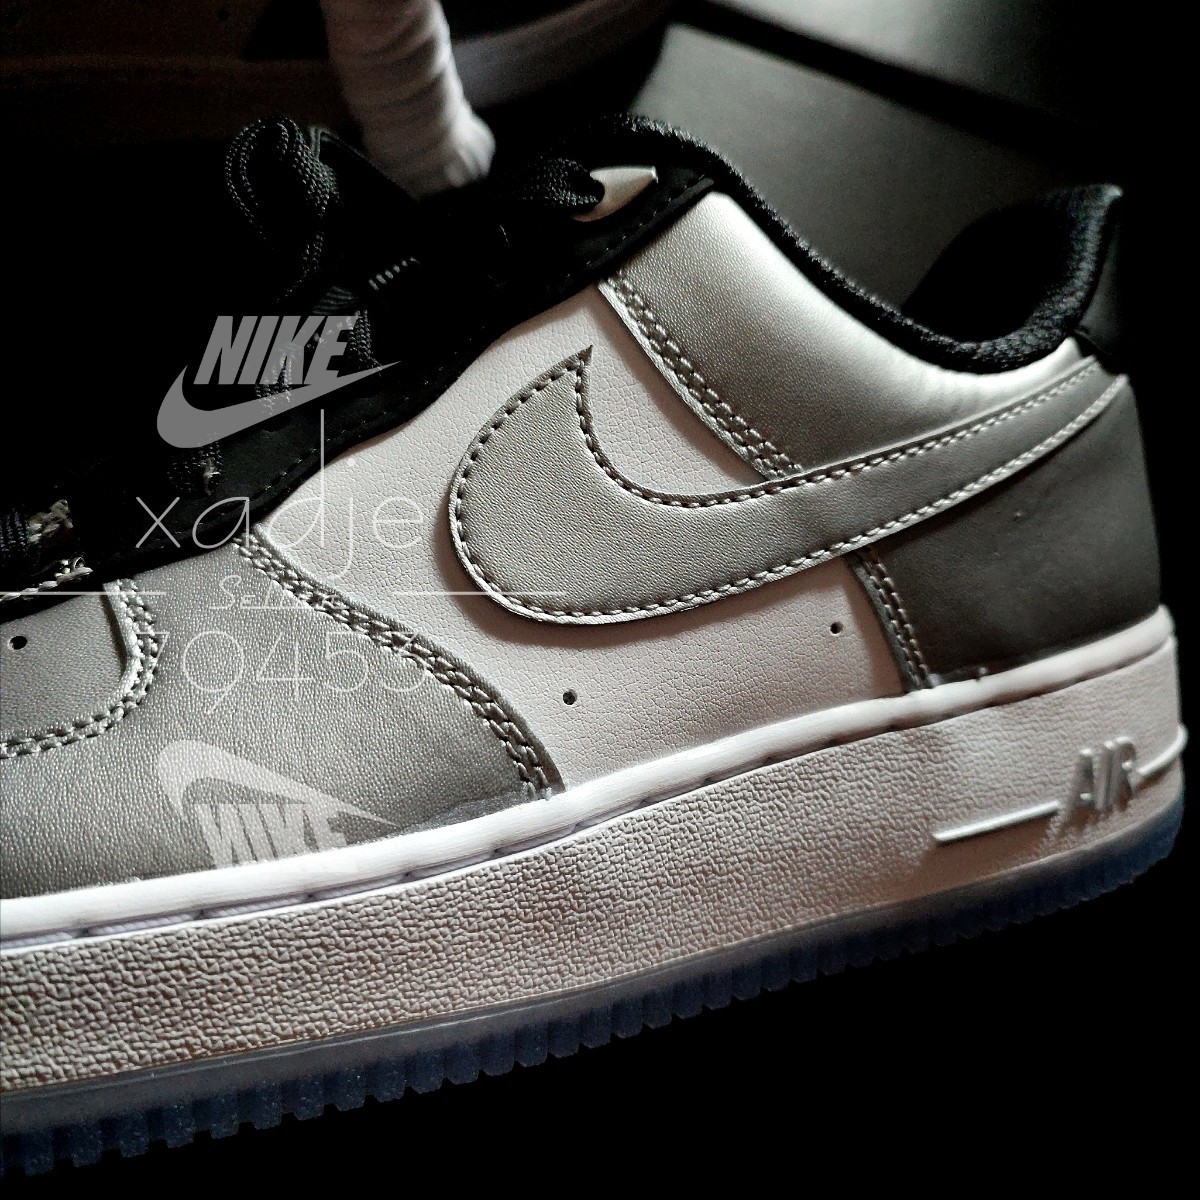  new goods regular goods NIKE Nike AIR FORCE1 LOW Air Force 1 low 07 SE silver silver white black WMNS 28.5cm ( real quality 28cm) US11.5 change cord box attaching 